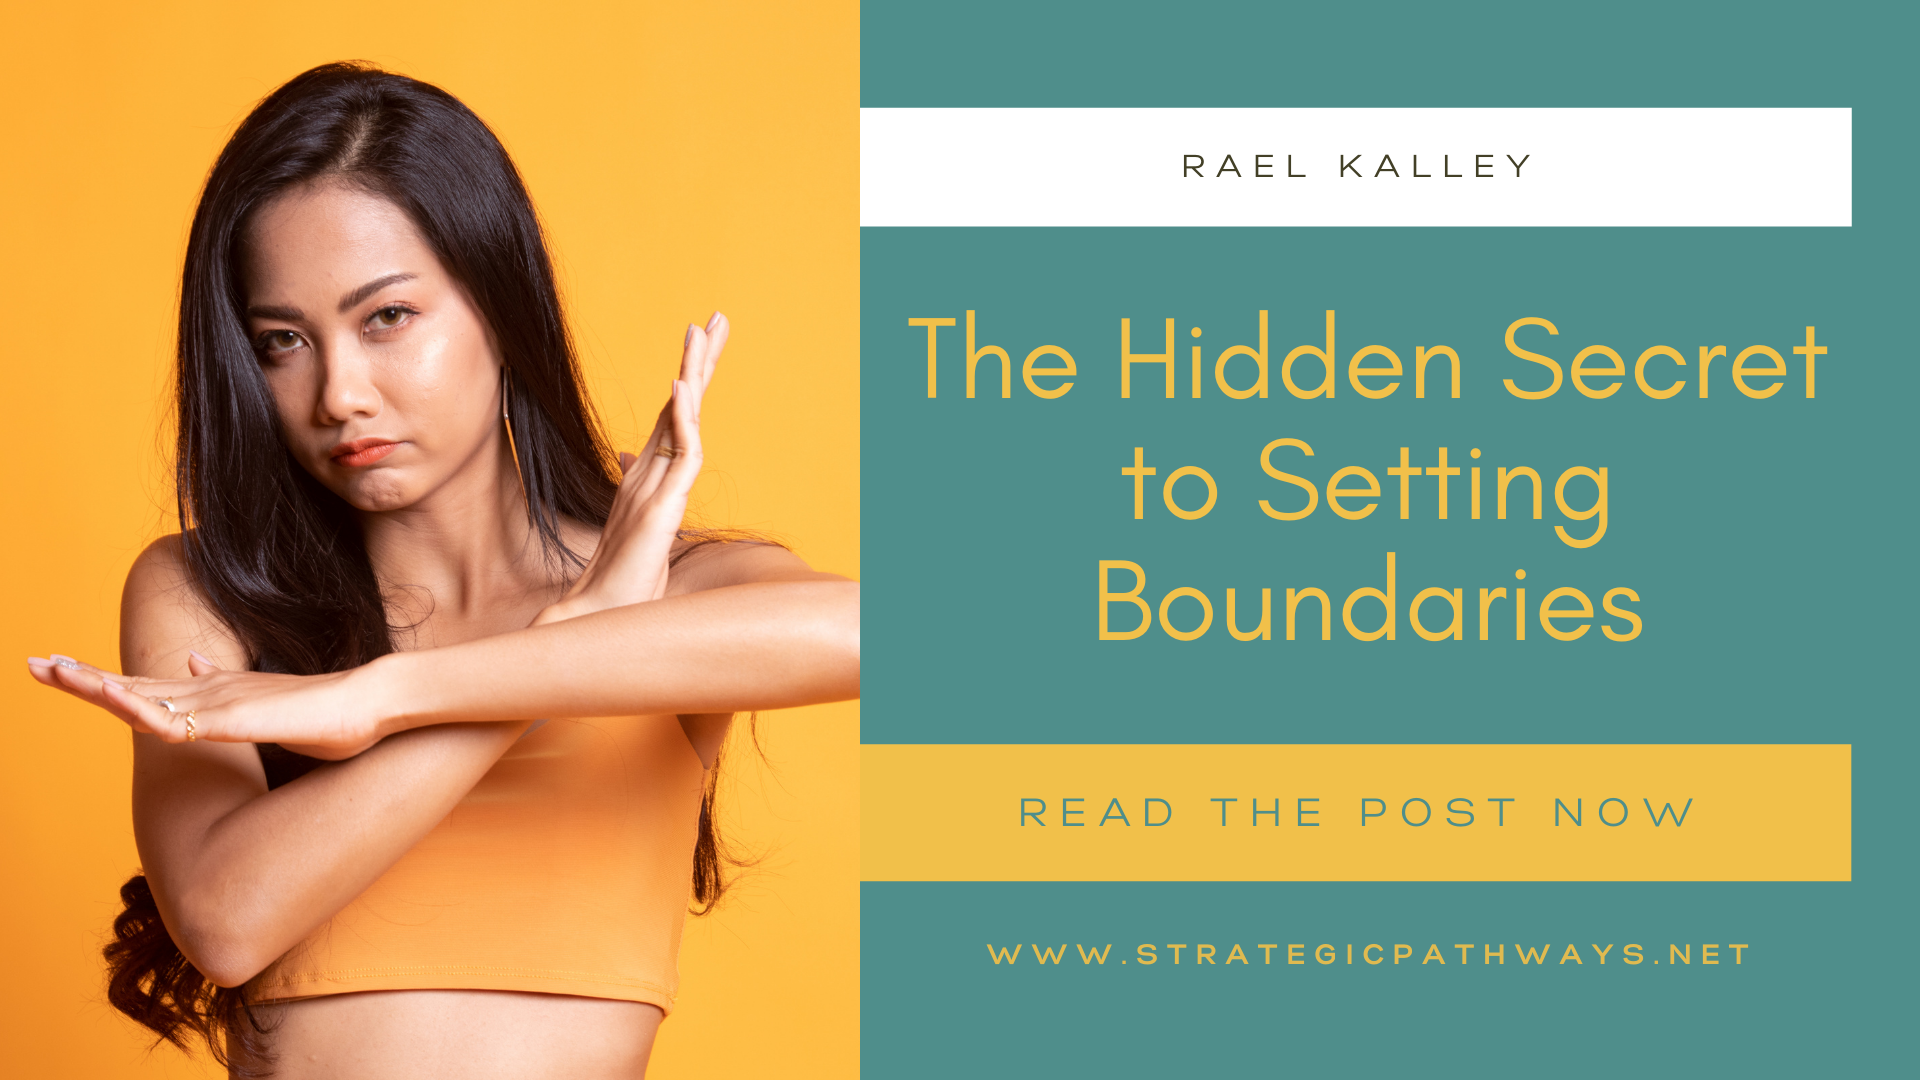 Text says "The Hidden Secret to Setting Boundaries" and a photo of a woman wearing a bright orange crop top, crossing her arms in front of her.